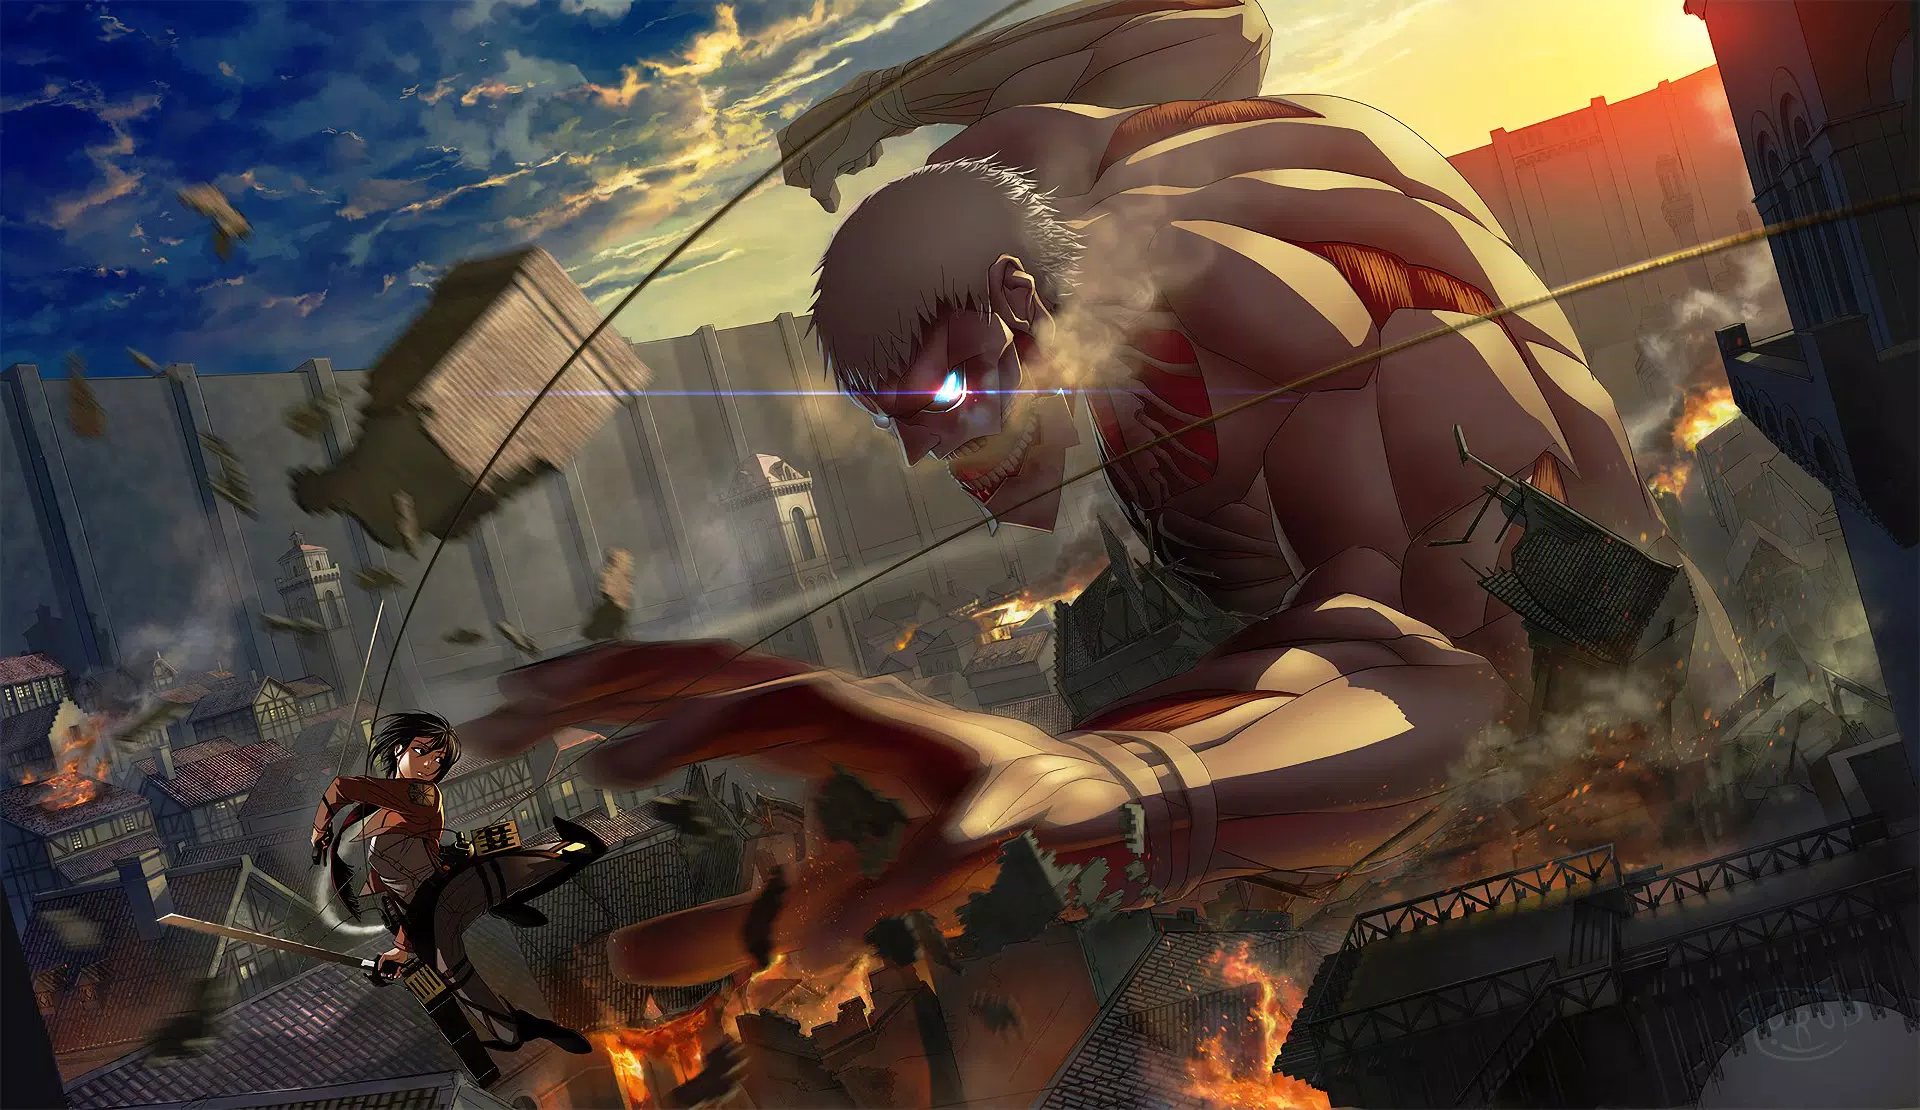 Attack On Titan 3D Game Clue Apk Download for Android- Latest version 1.0-  com.attack.aotmobile.guidetitans